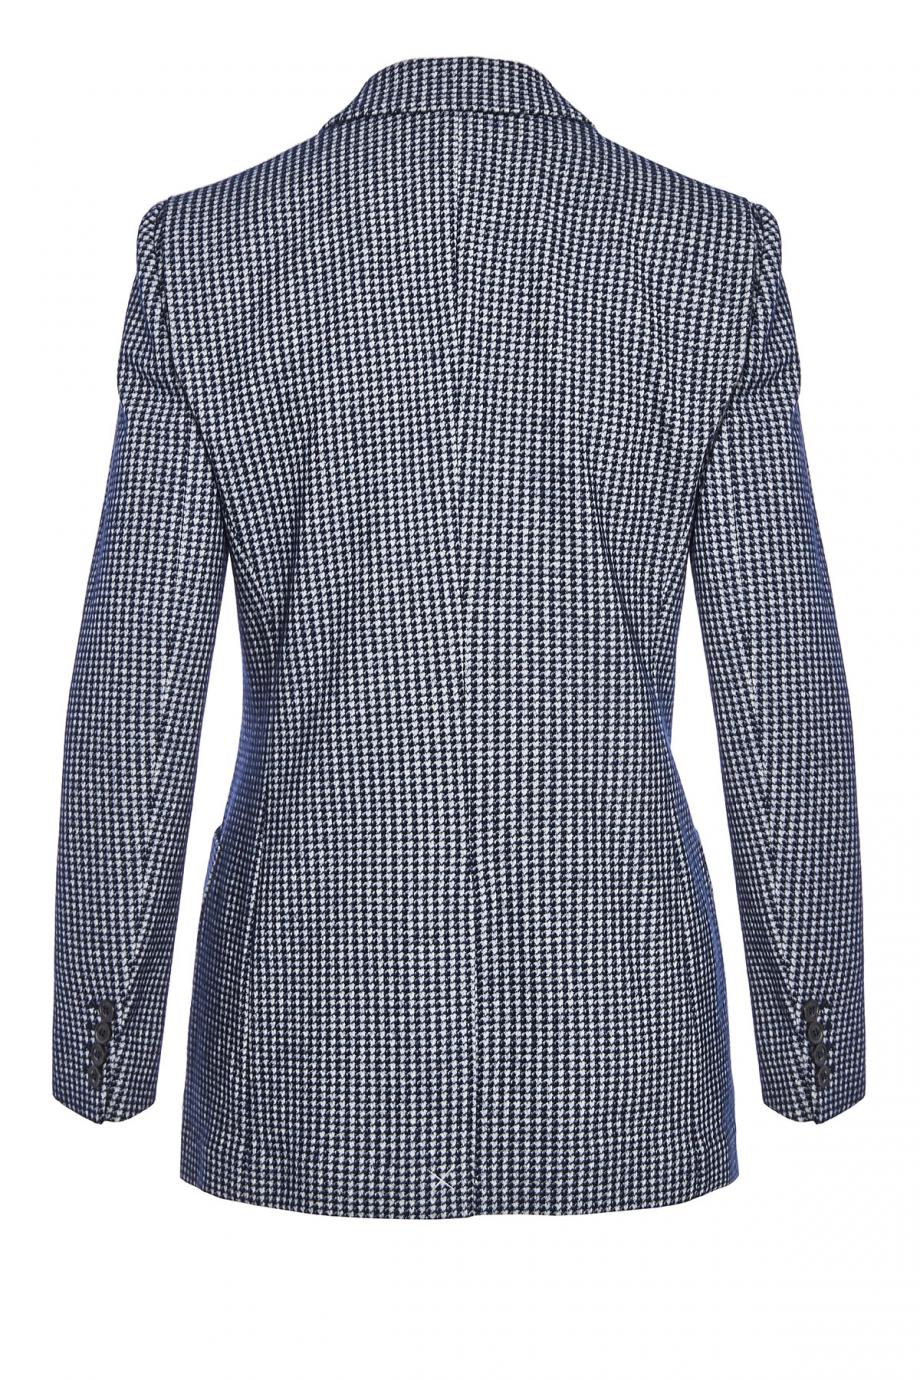 Houndstooth wool and cotton blazer